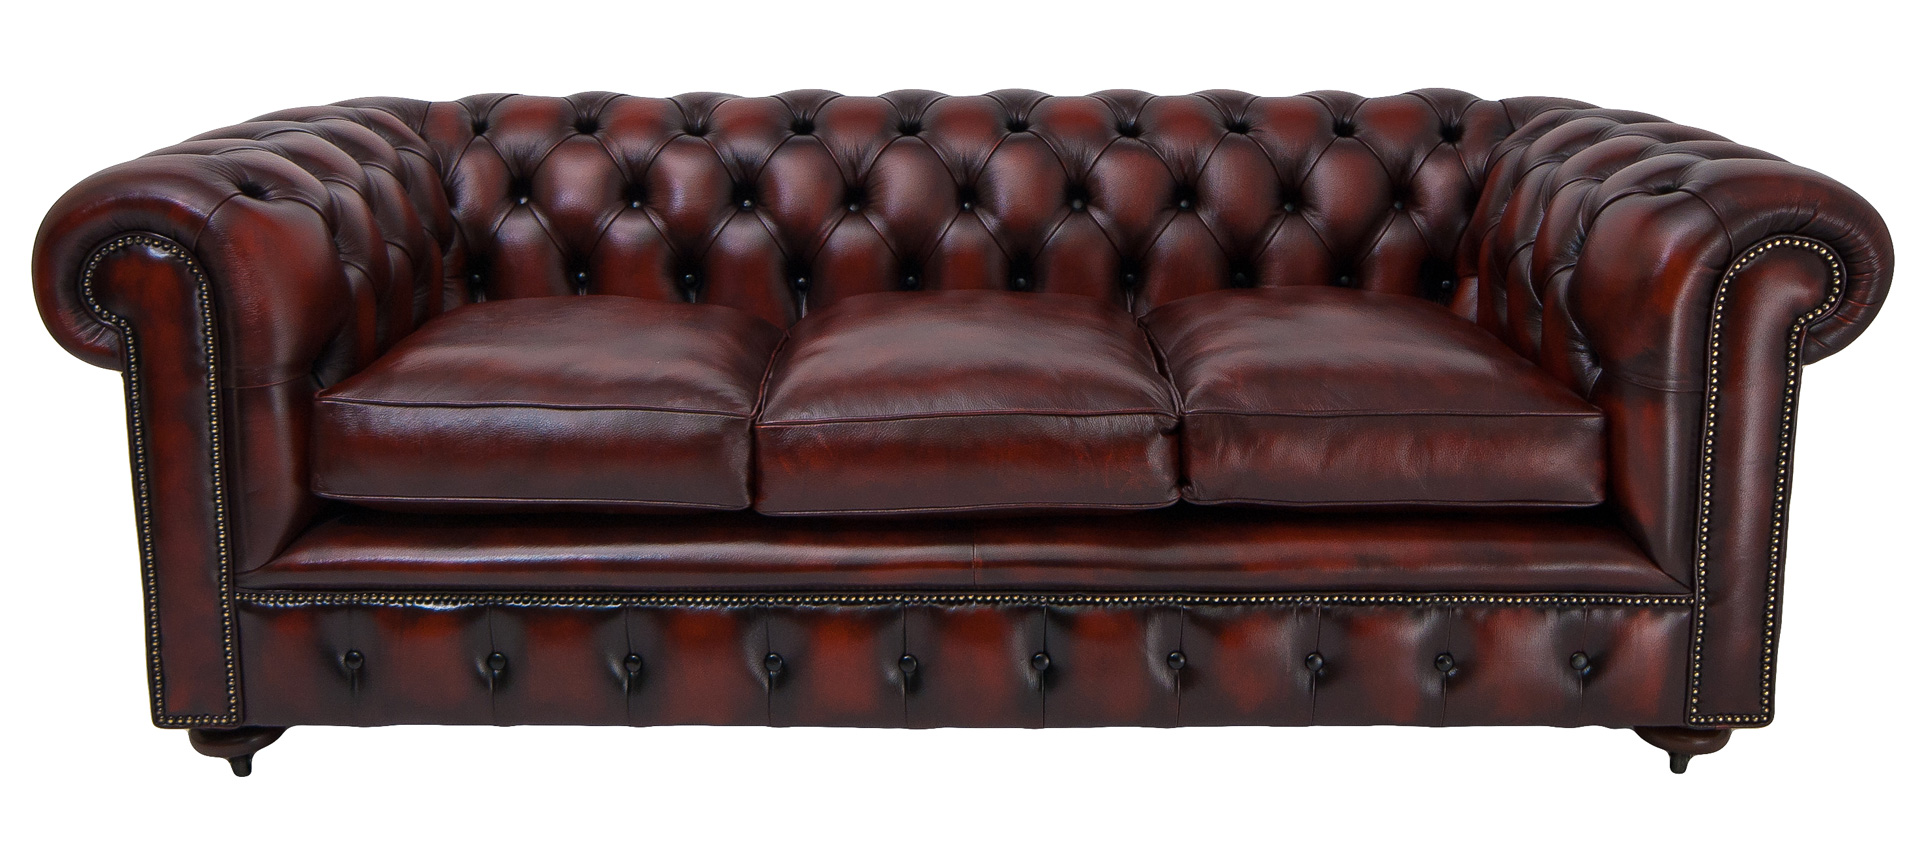 Canterbury Chesterfield 3 Seater